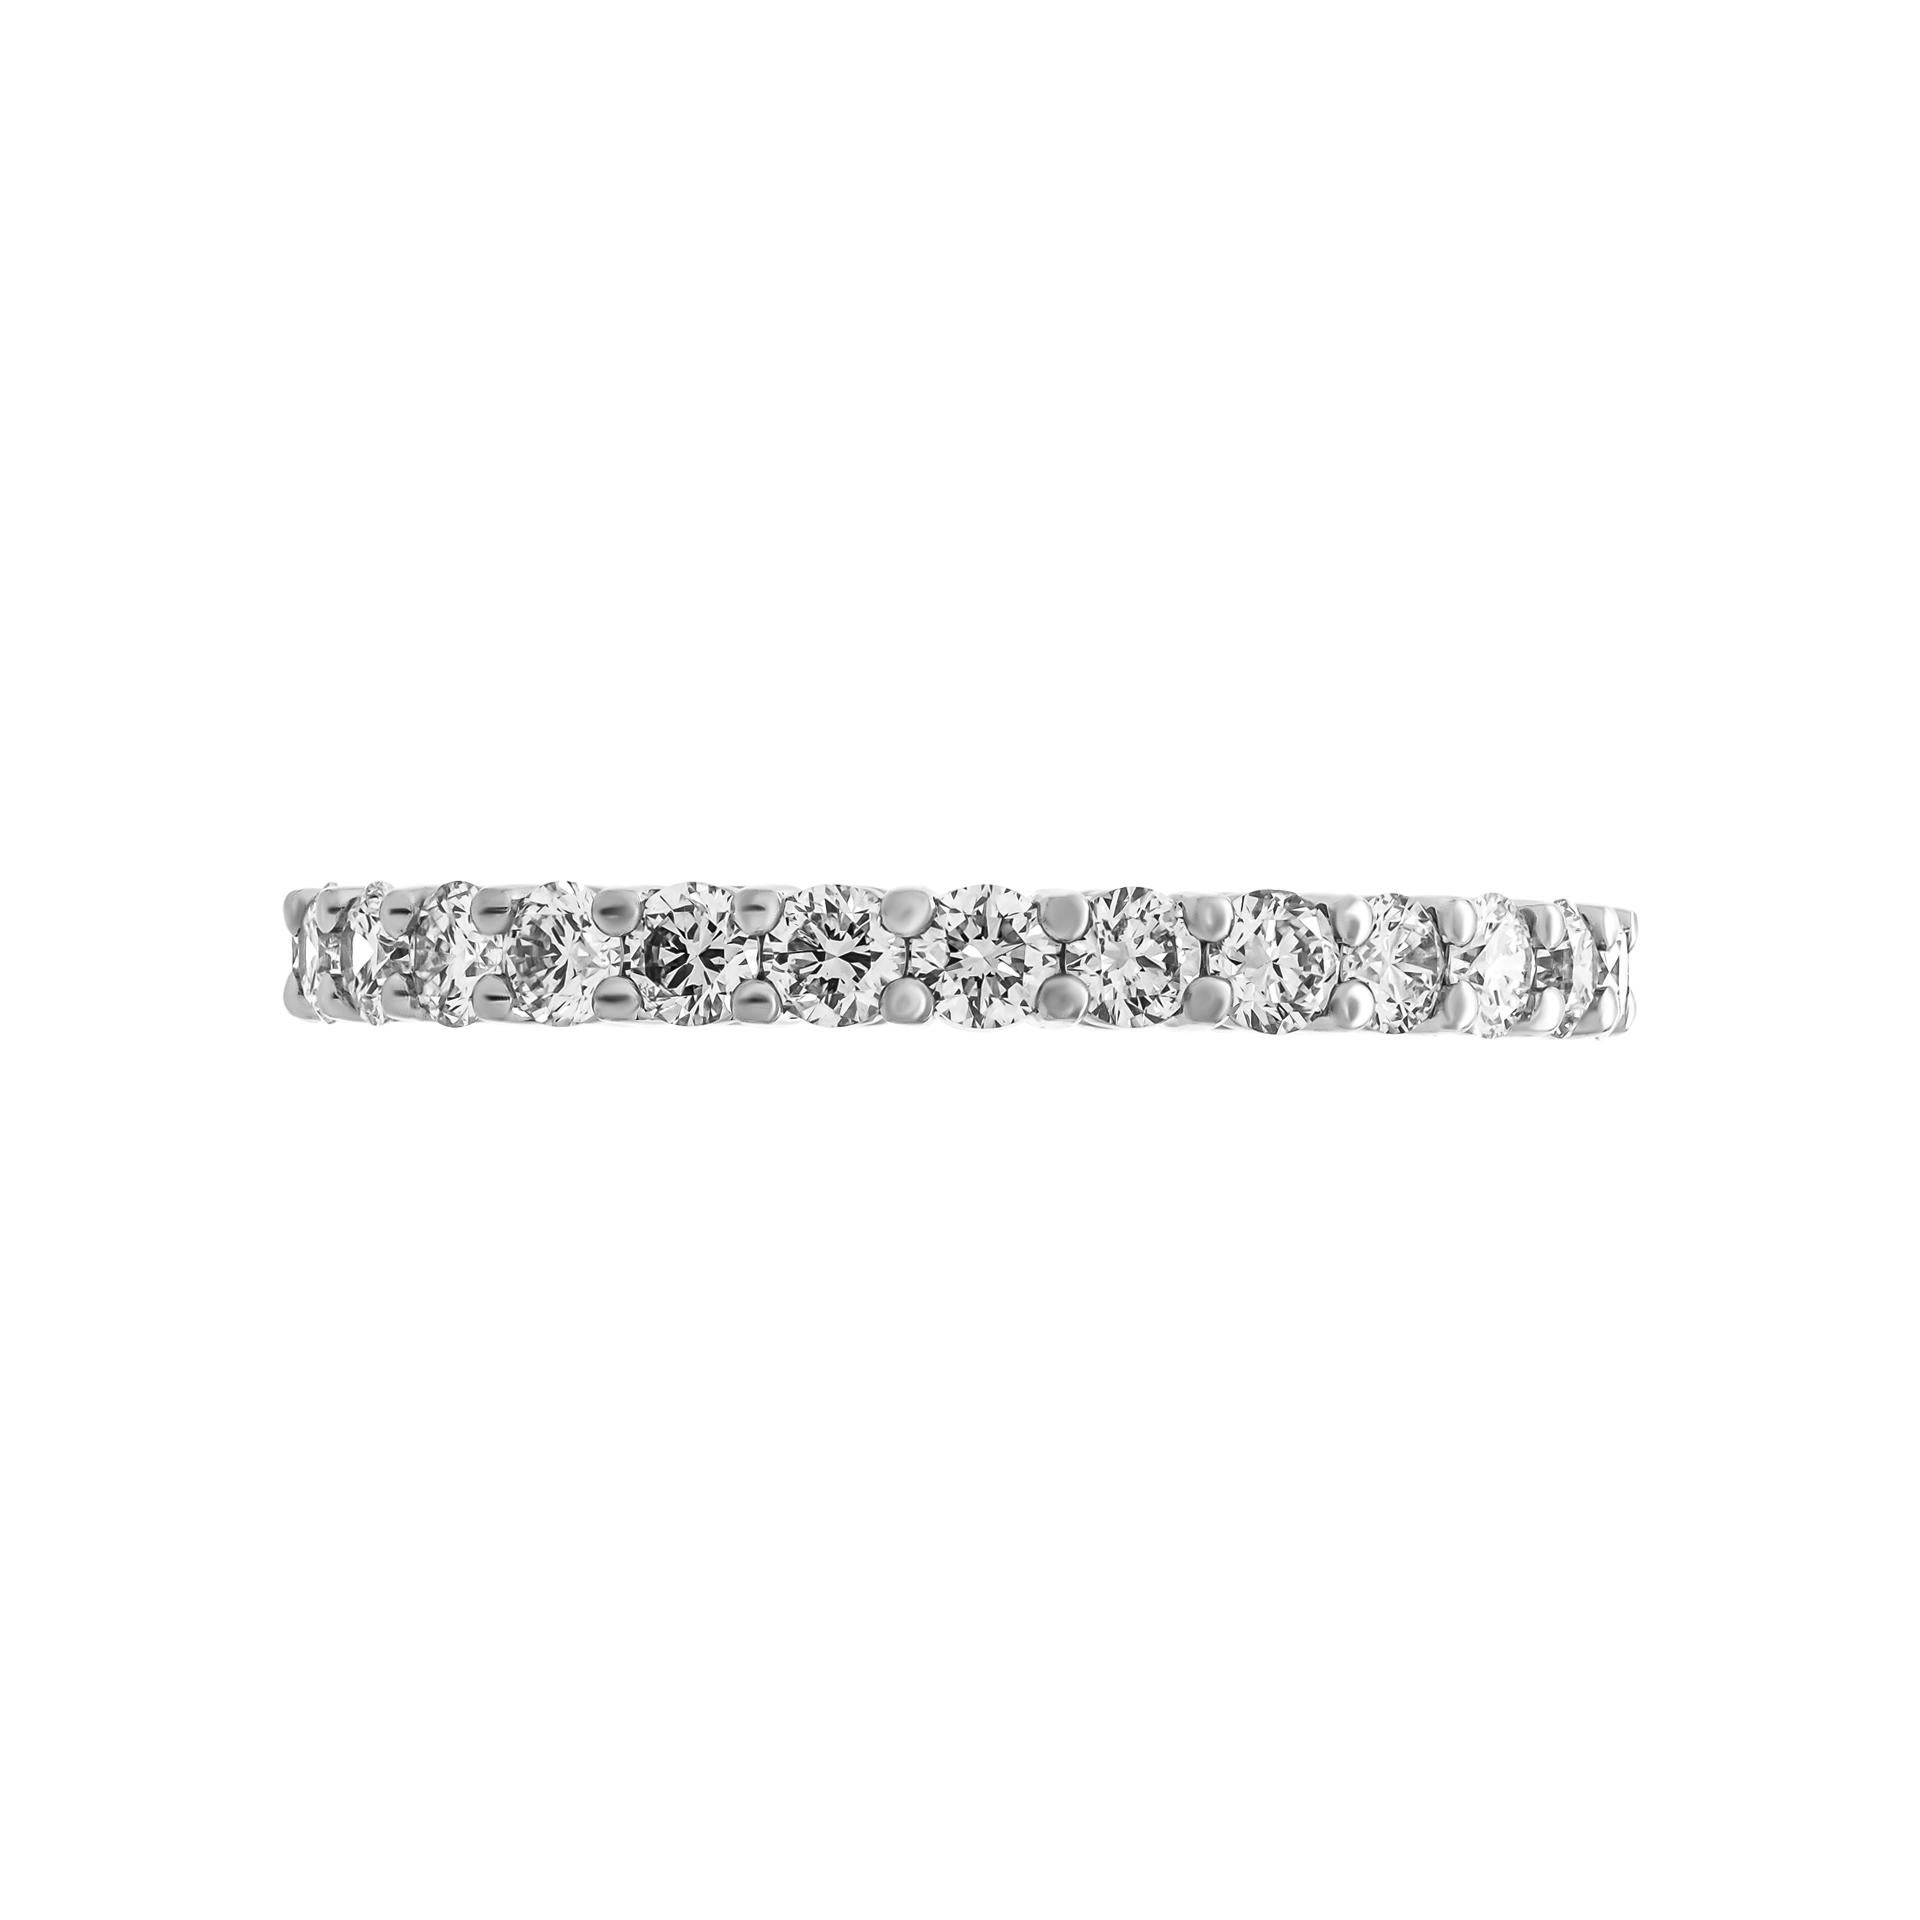 Wedding band setting in Platinum
Total Carat Weight: 1.24ct 
Size: 6.25